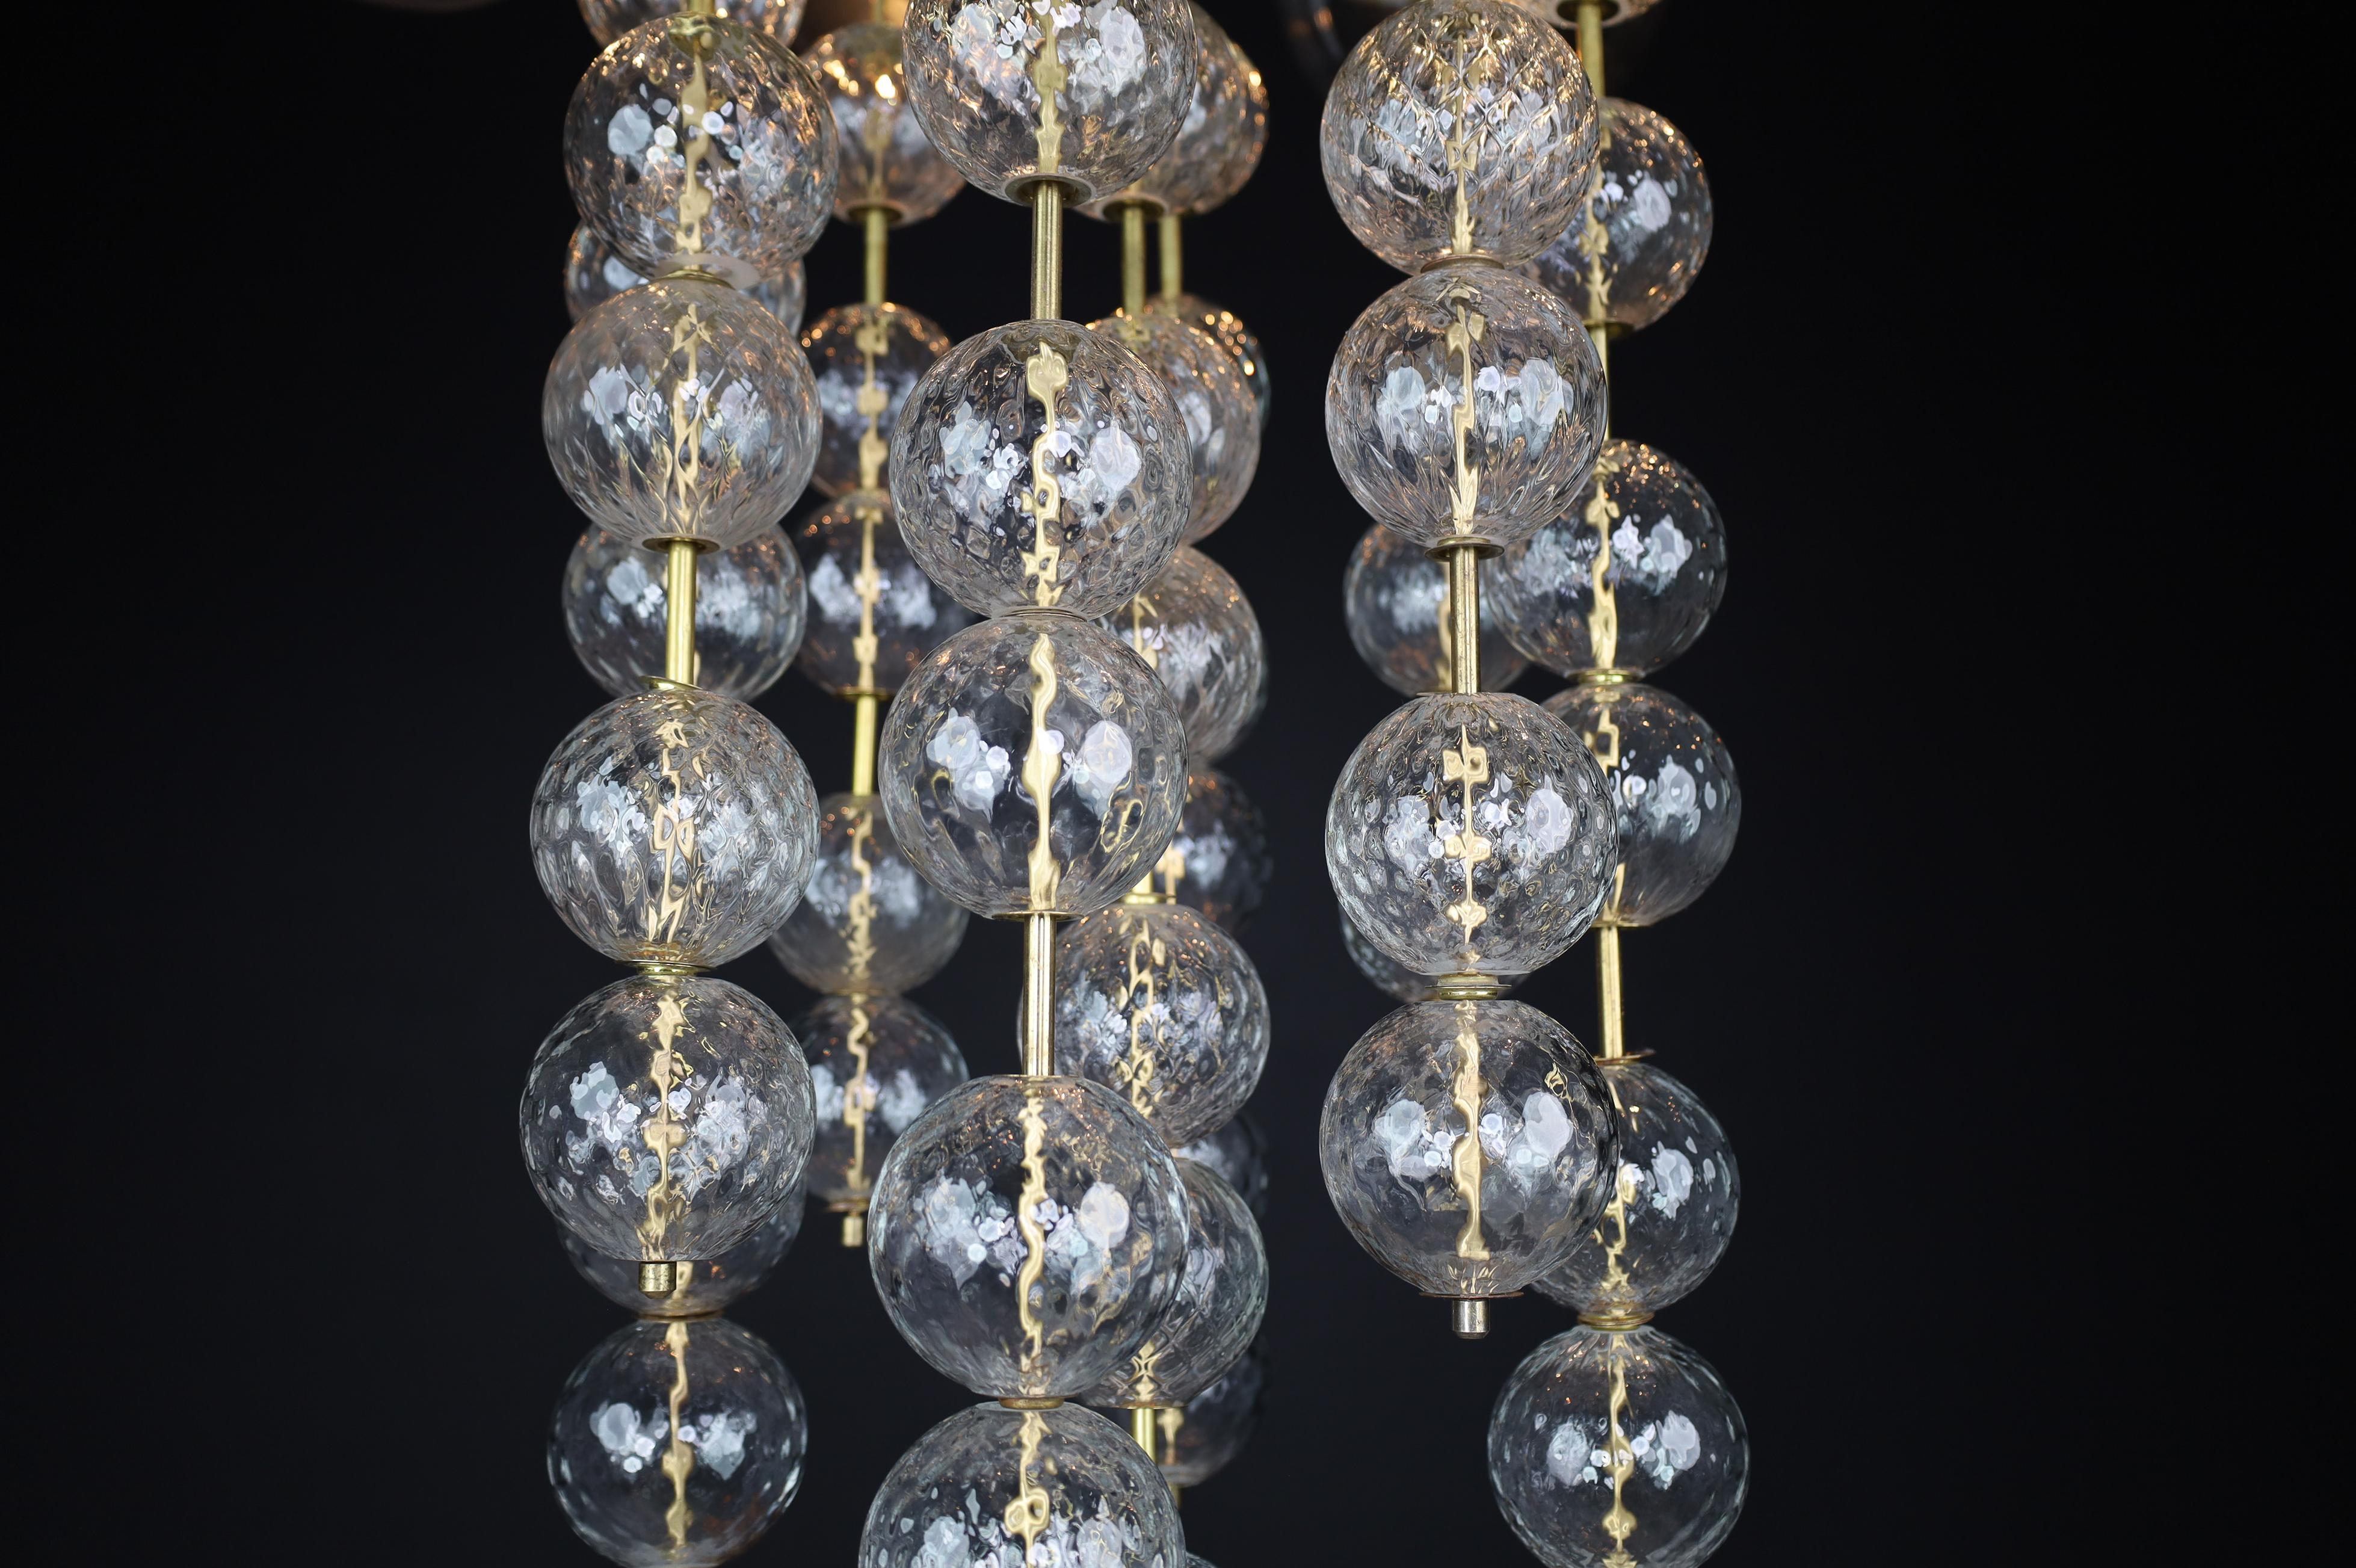 Grand Chandelier with Brass Fixture and Hand-blowed Glass Globes, 1960s For Sale 2